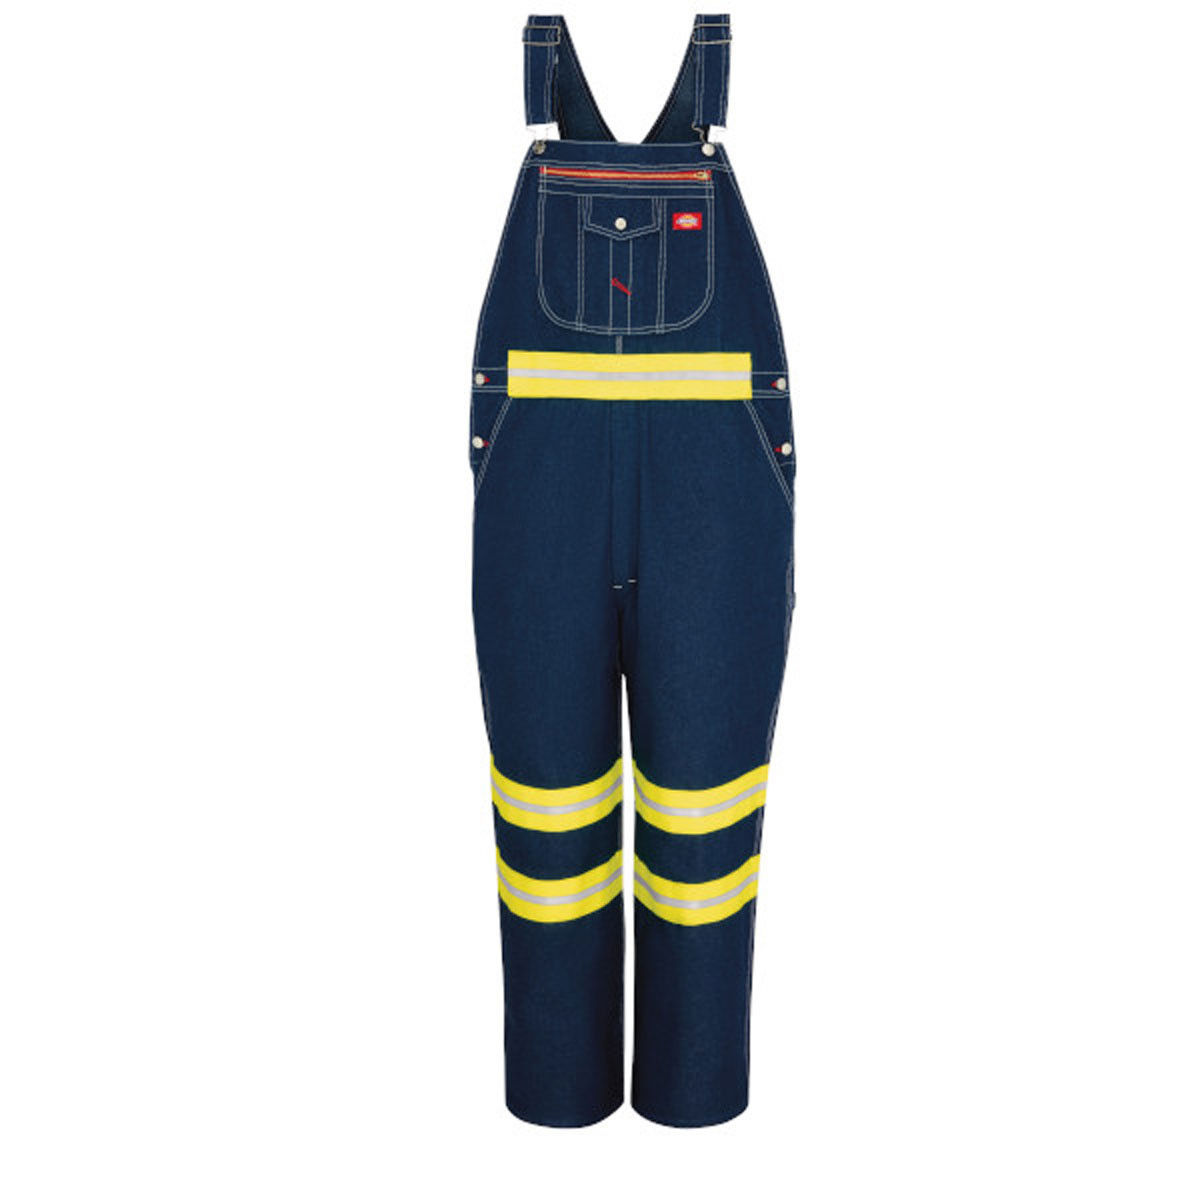 Before buying, can I see the Dickies bib overalls size chart and pocket types?